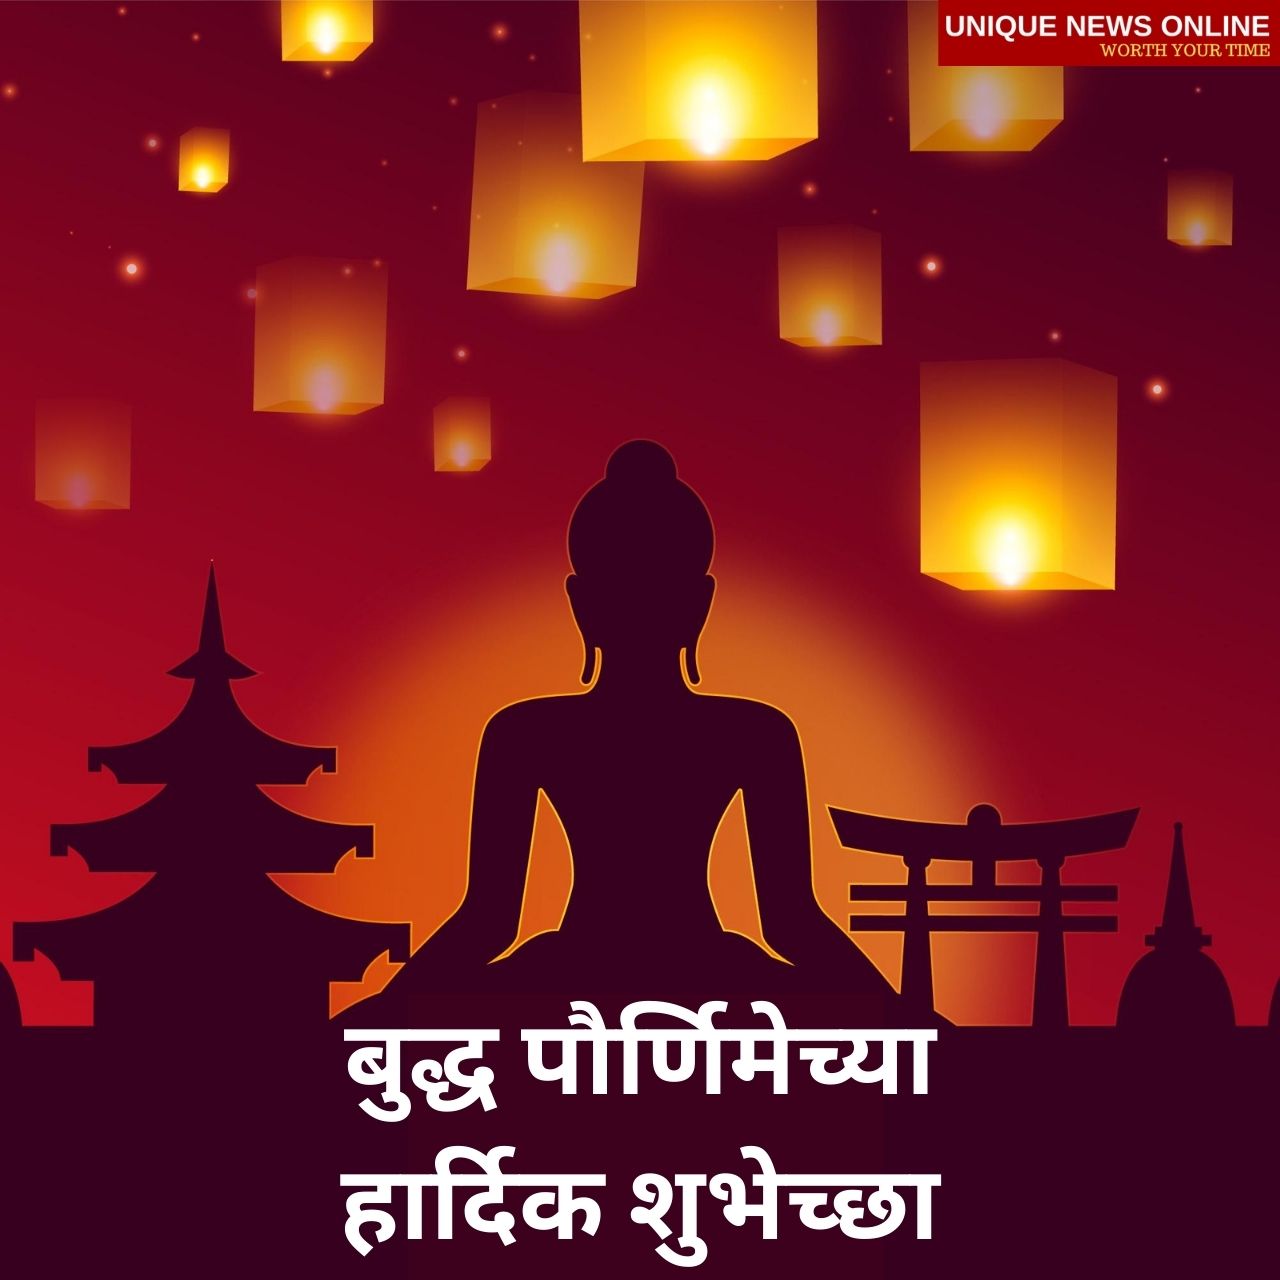 Buddha Purnima 2021: Marathi Wishes, HD Images, Greetings, Quotes, Status, and WhatsApp Messages to Share